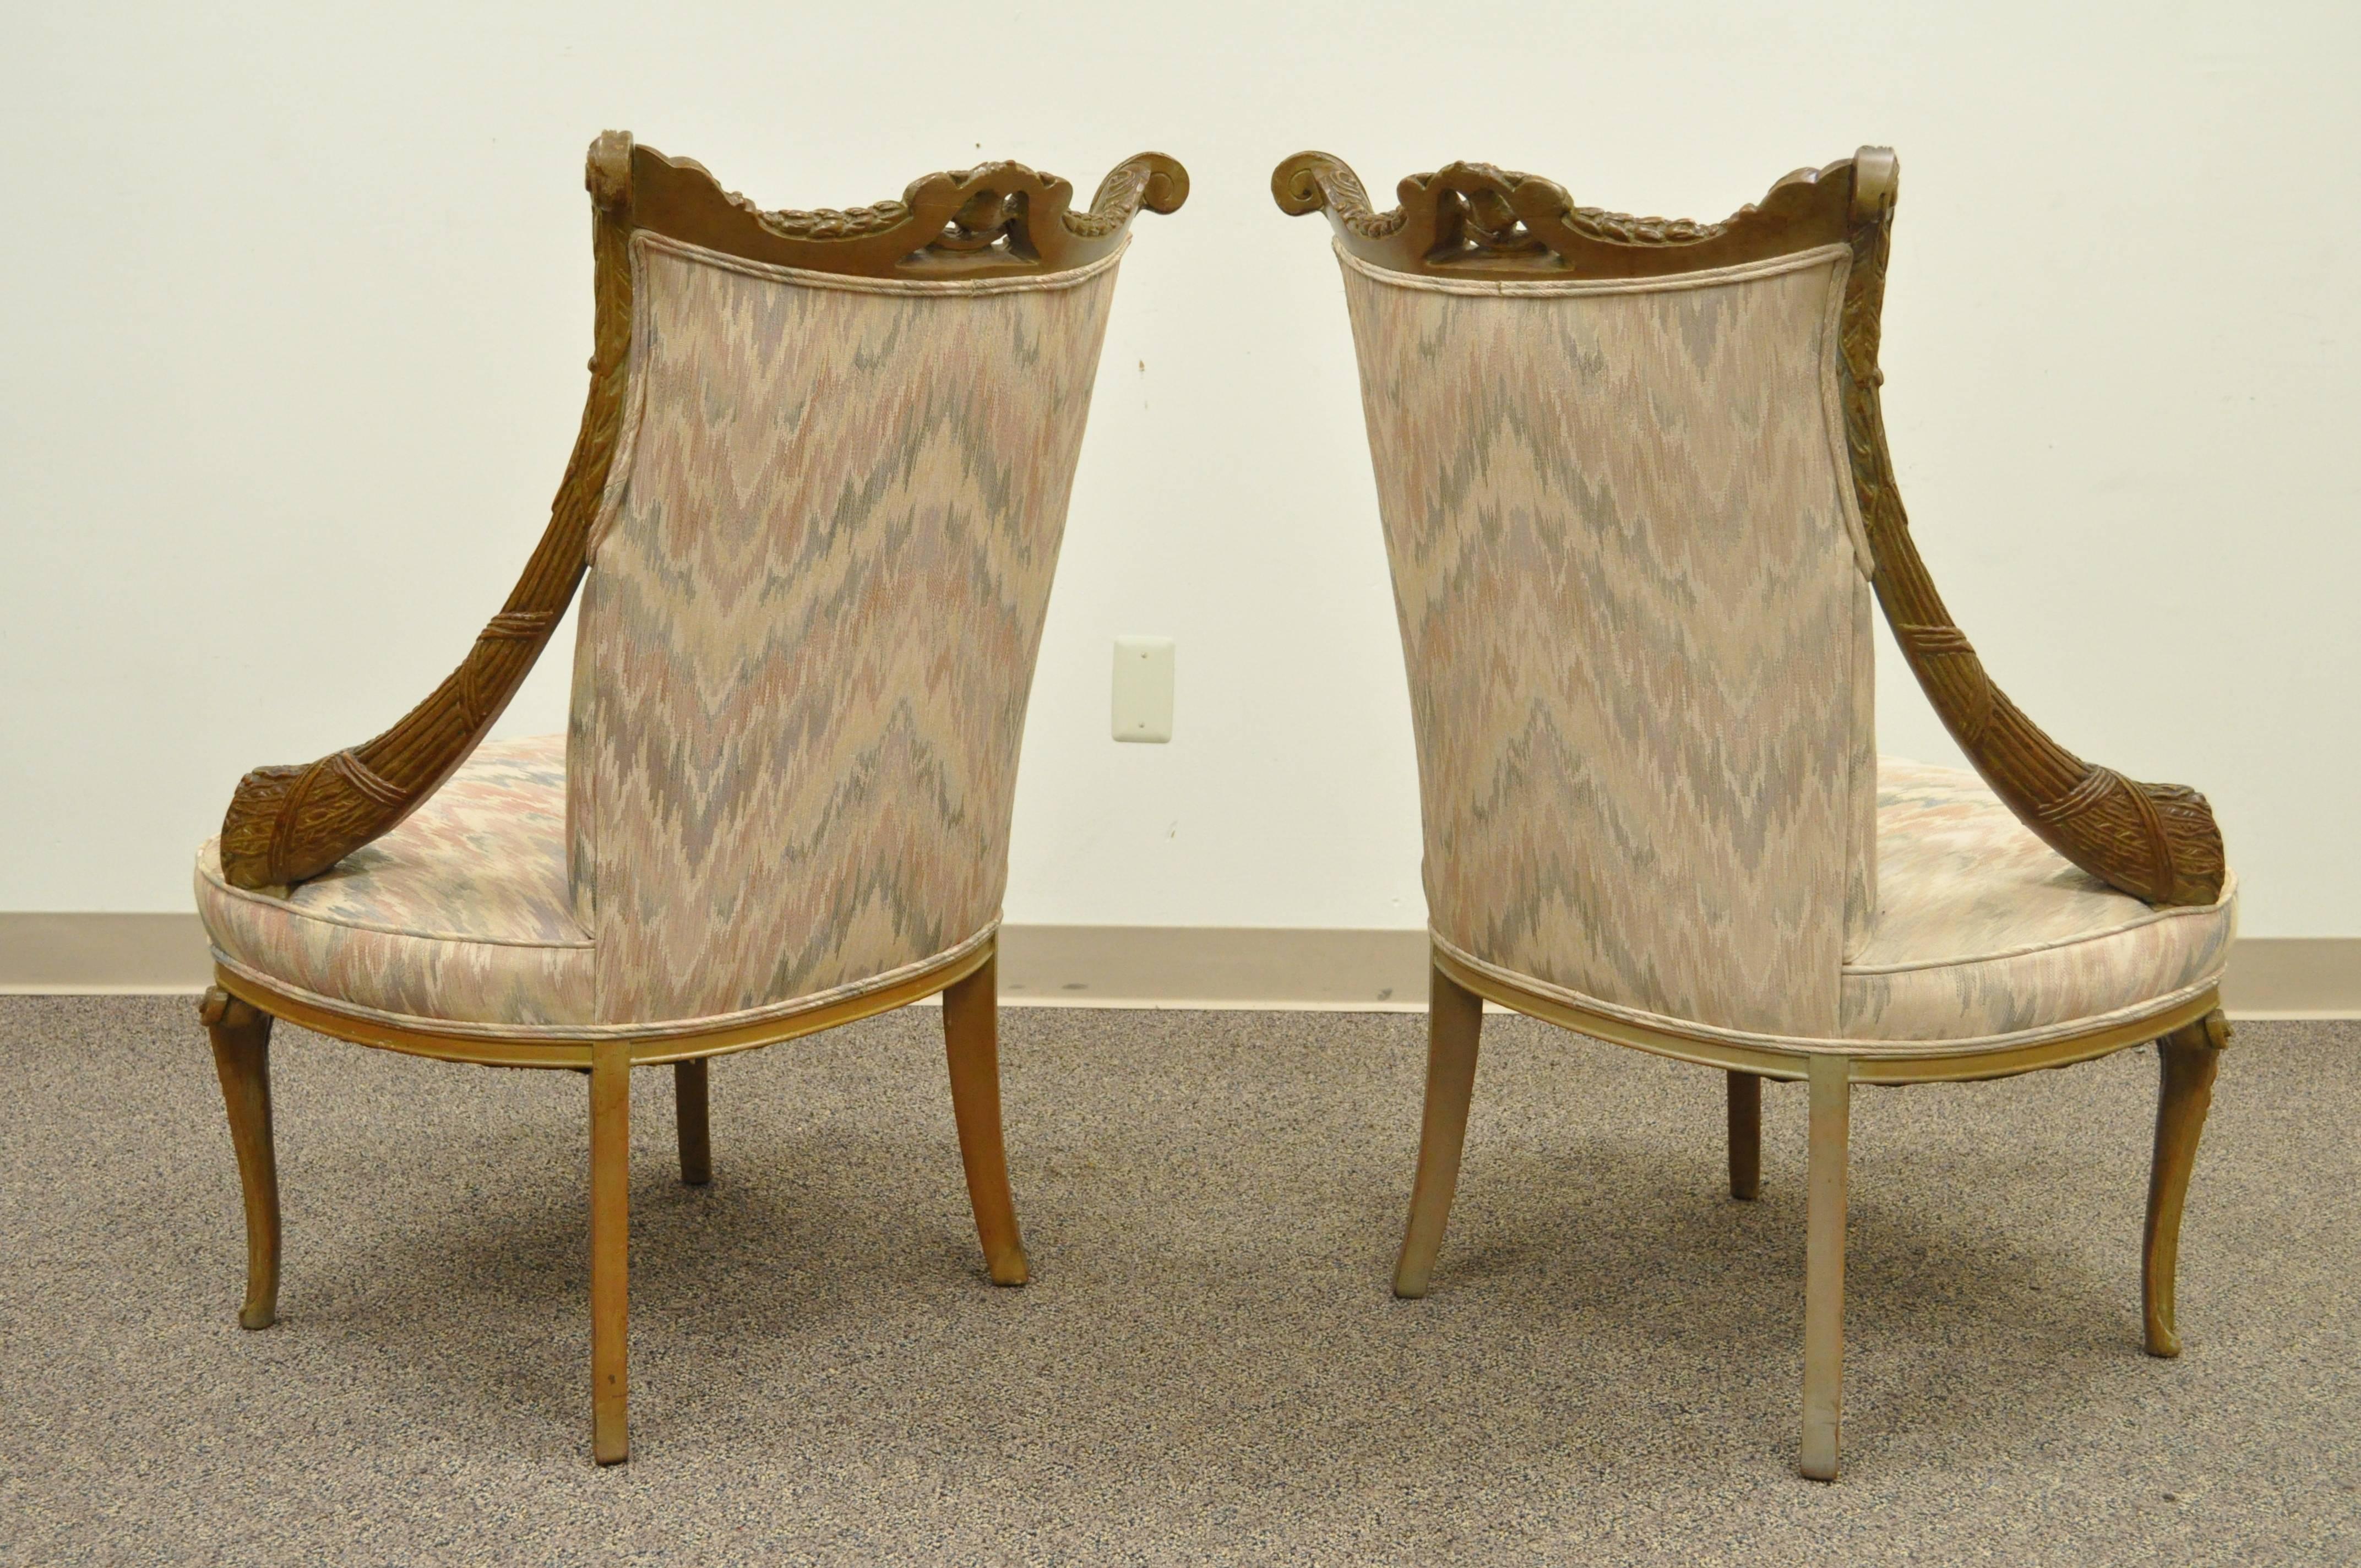 Pair 1940s Hollywood Regency Carved Parlor Chairs Attributed to Grosfeld House For Sale 2